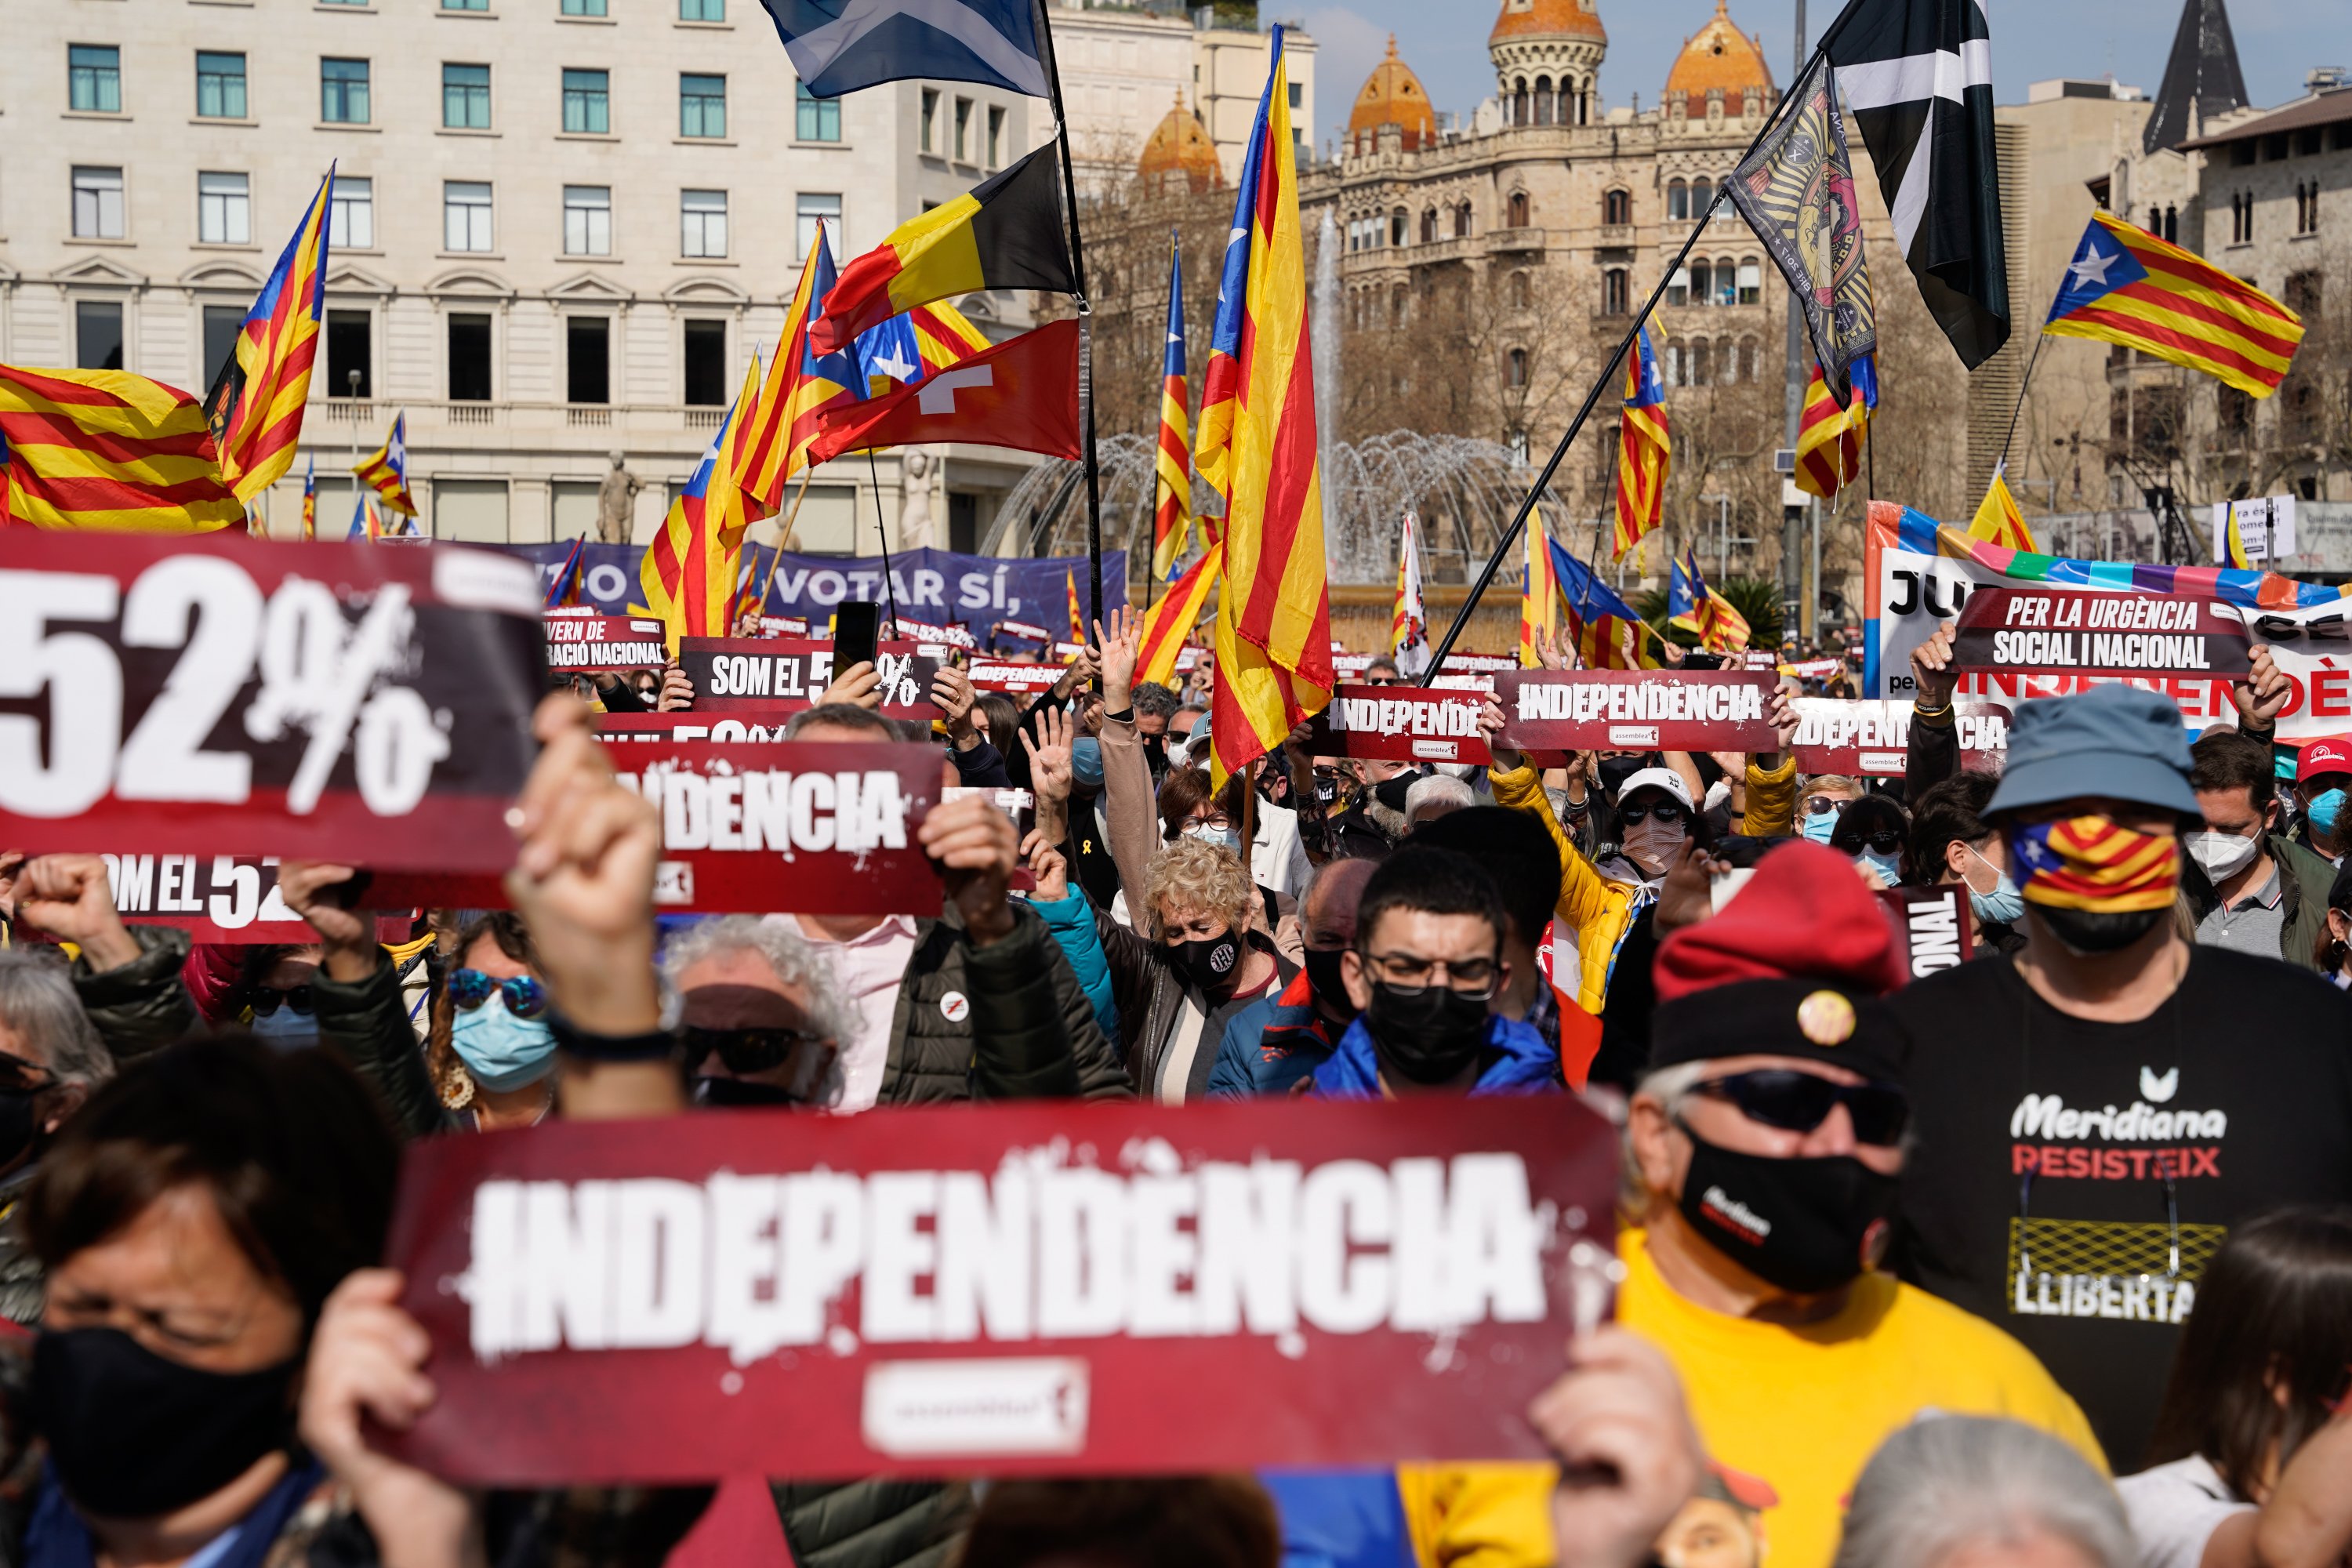 Pro-independence protests will greet Felipe VI and Sánchez in Catalonia this Friday